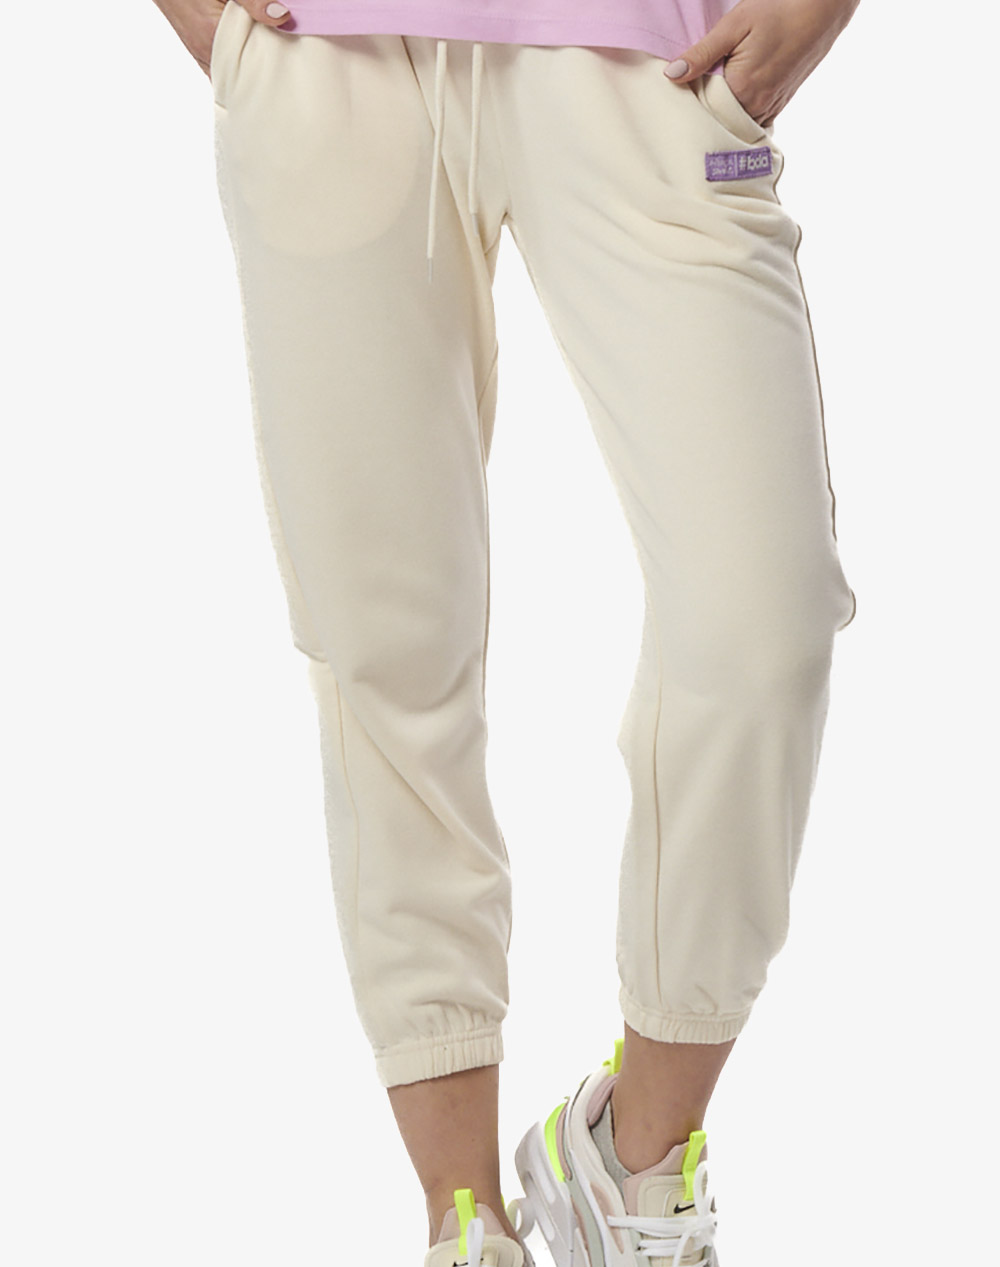 BODY ACTION WOMEN”S HIGH WAIST PANTS 021434-01-Antique White OffWhite 3810PBODY2040052_XR15930